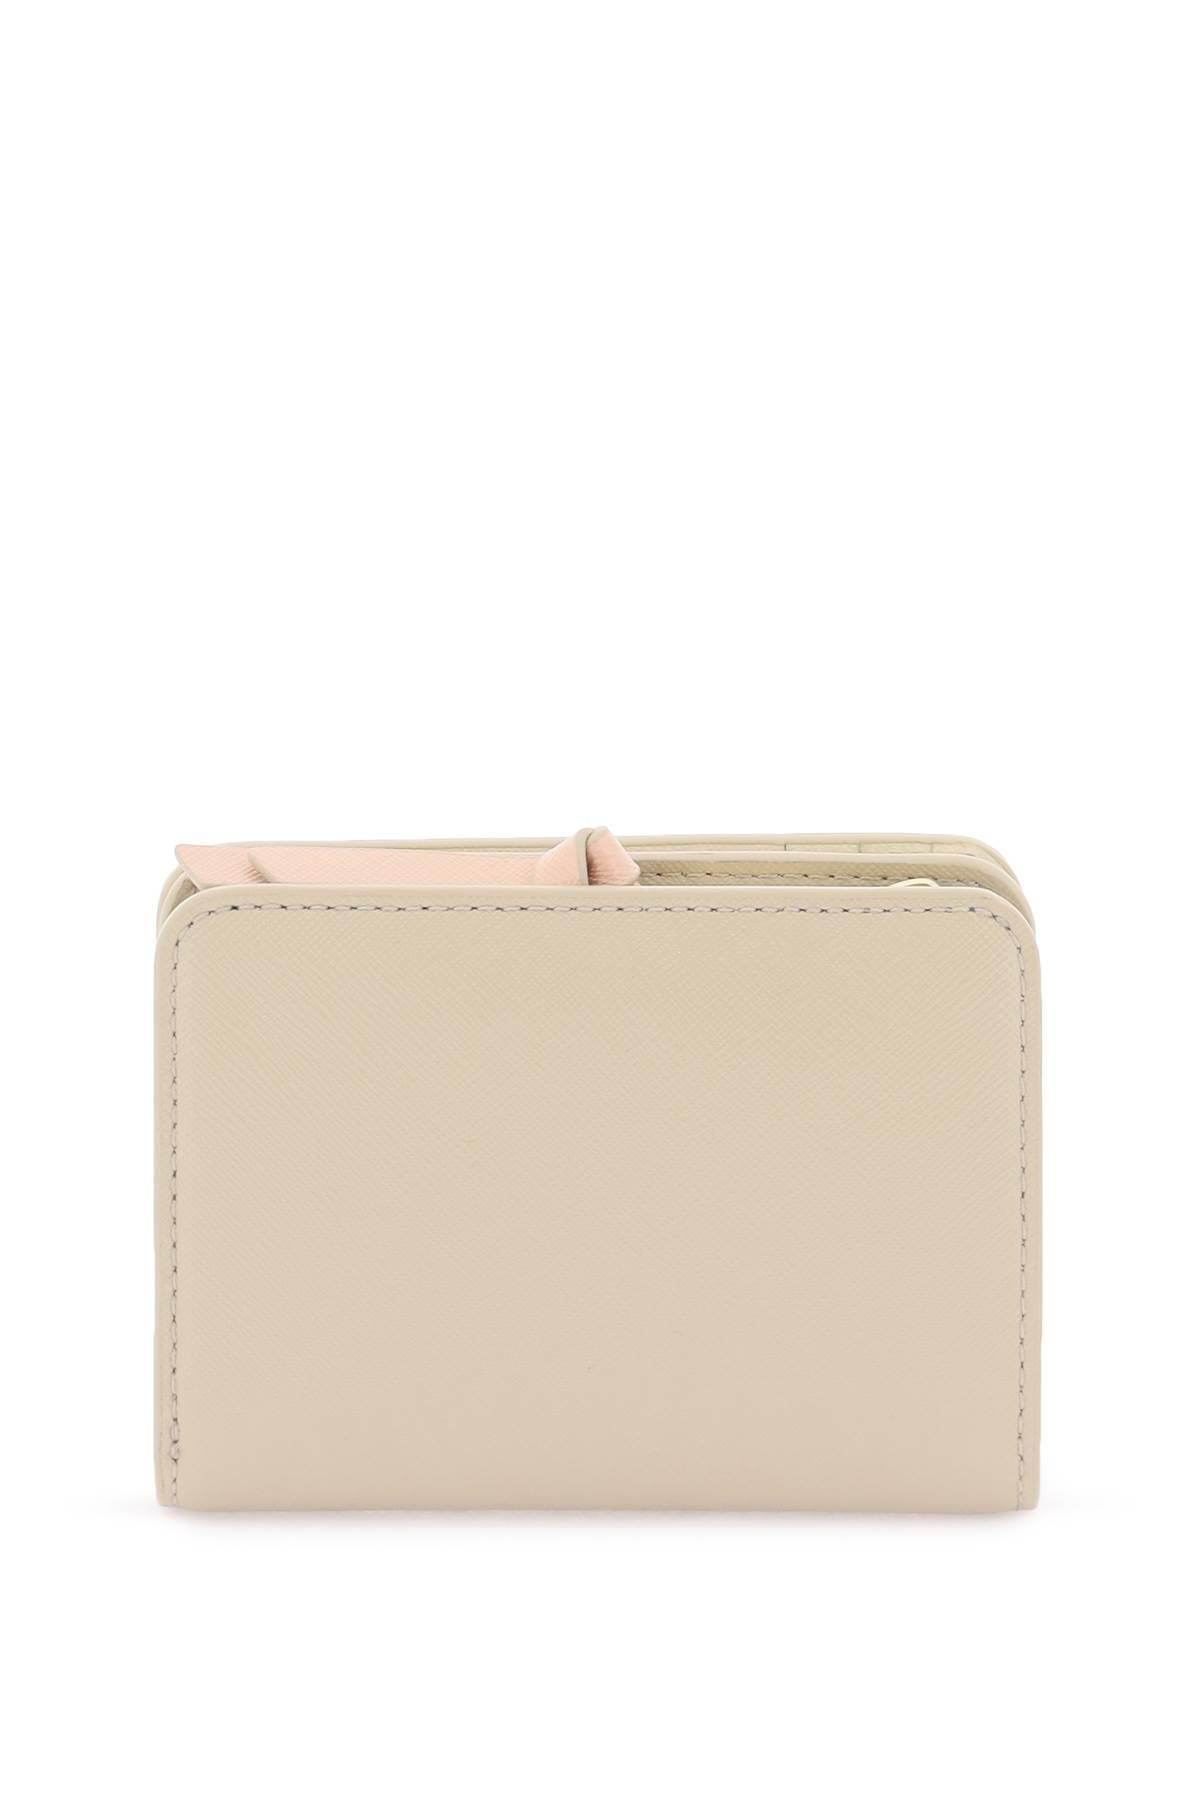 Marc Jacobs The Snapshot Mini Compact Wallet in Black